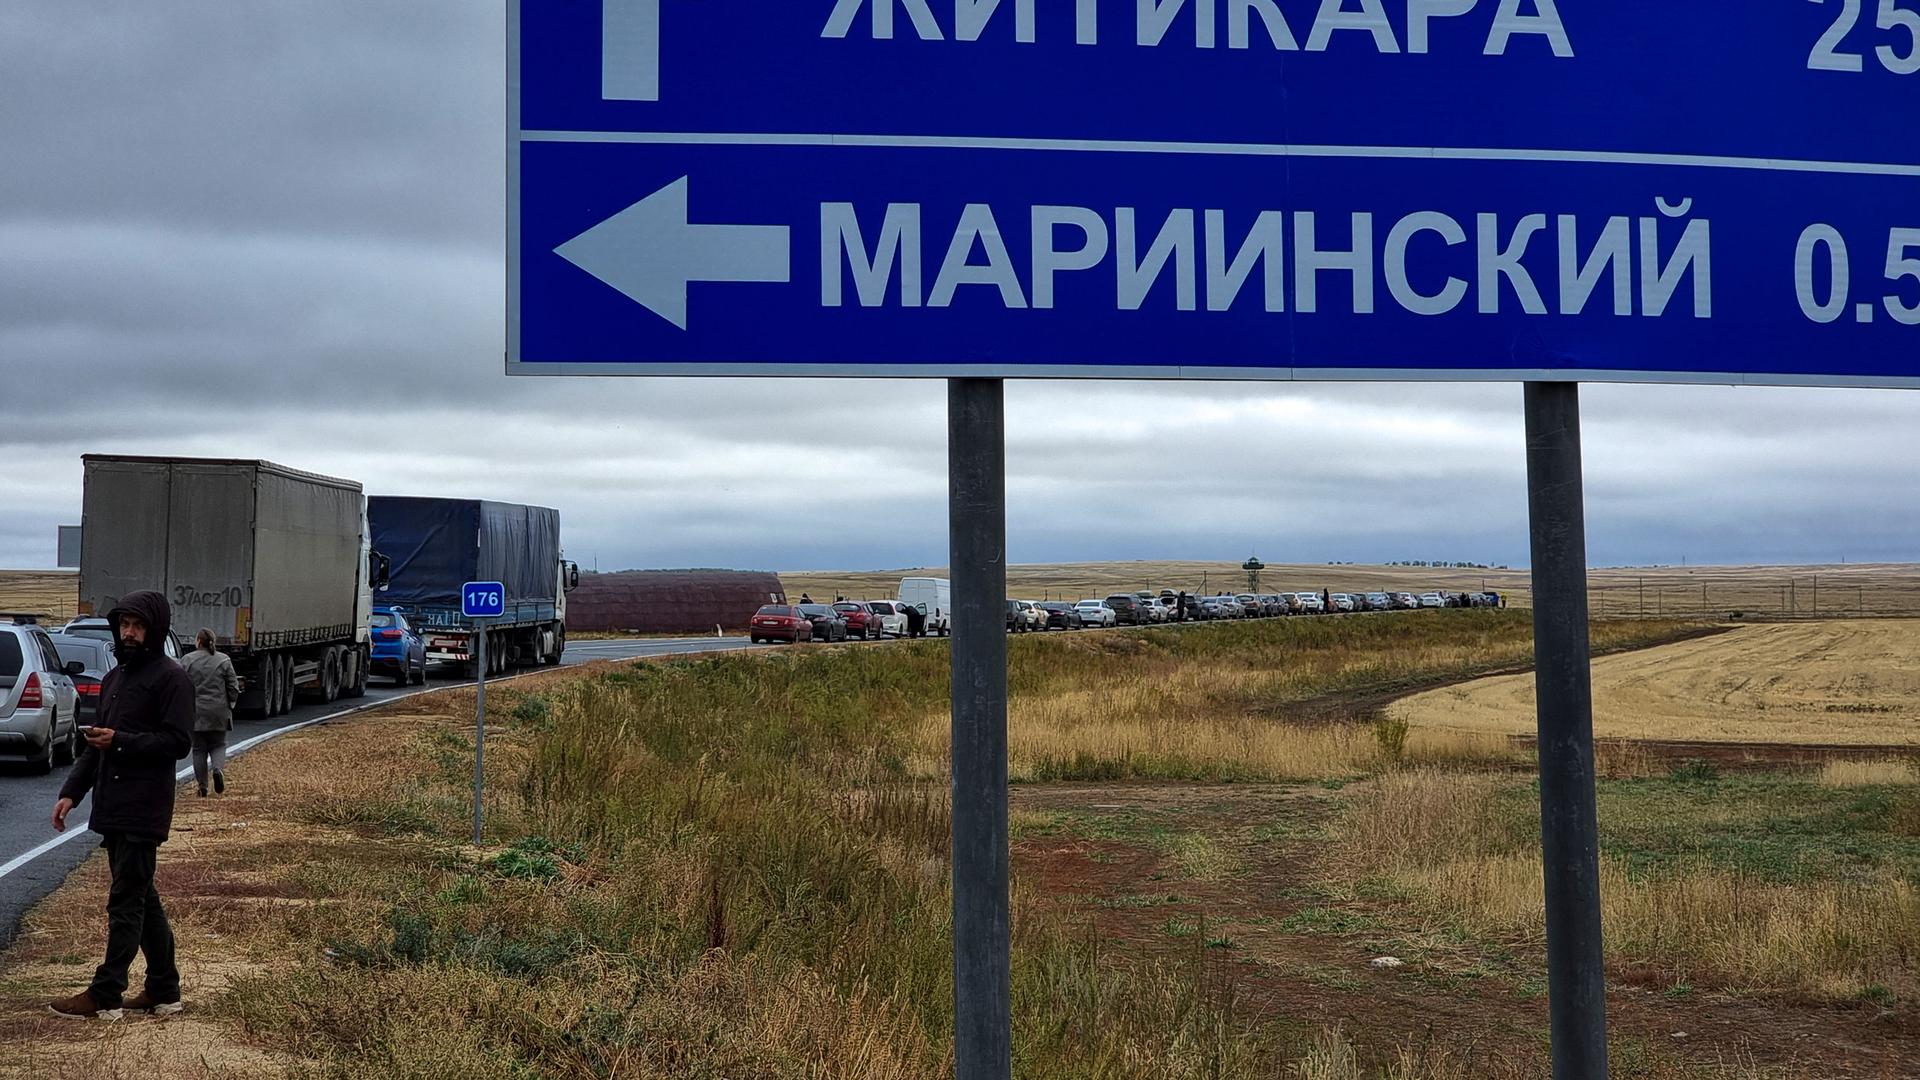 Cars queuing to cross the border into Kazakhstan at the Mariinsky border crossing, about (250 miles south of Chelyabinsk, Russia, Tuesday, Sept. 27, 2022. 